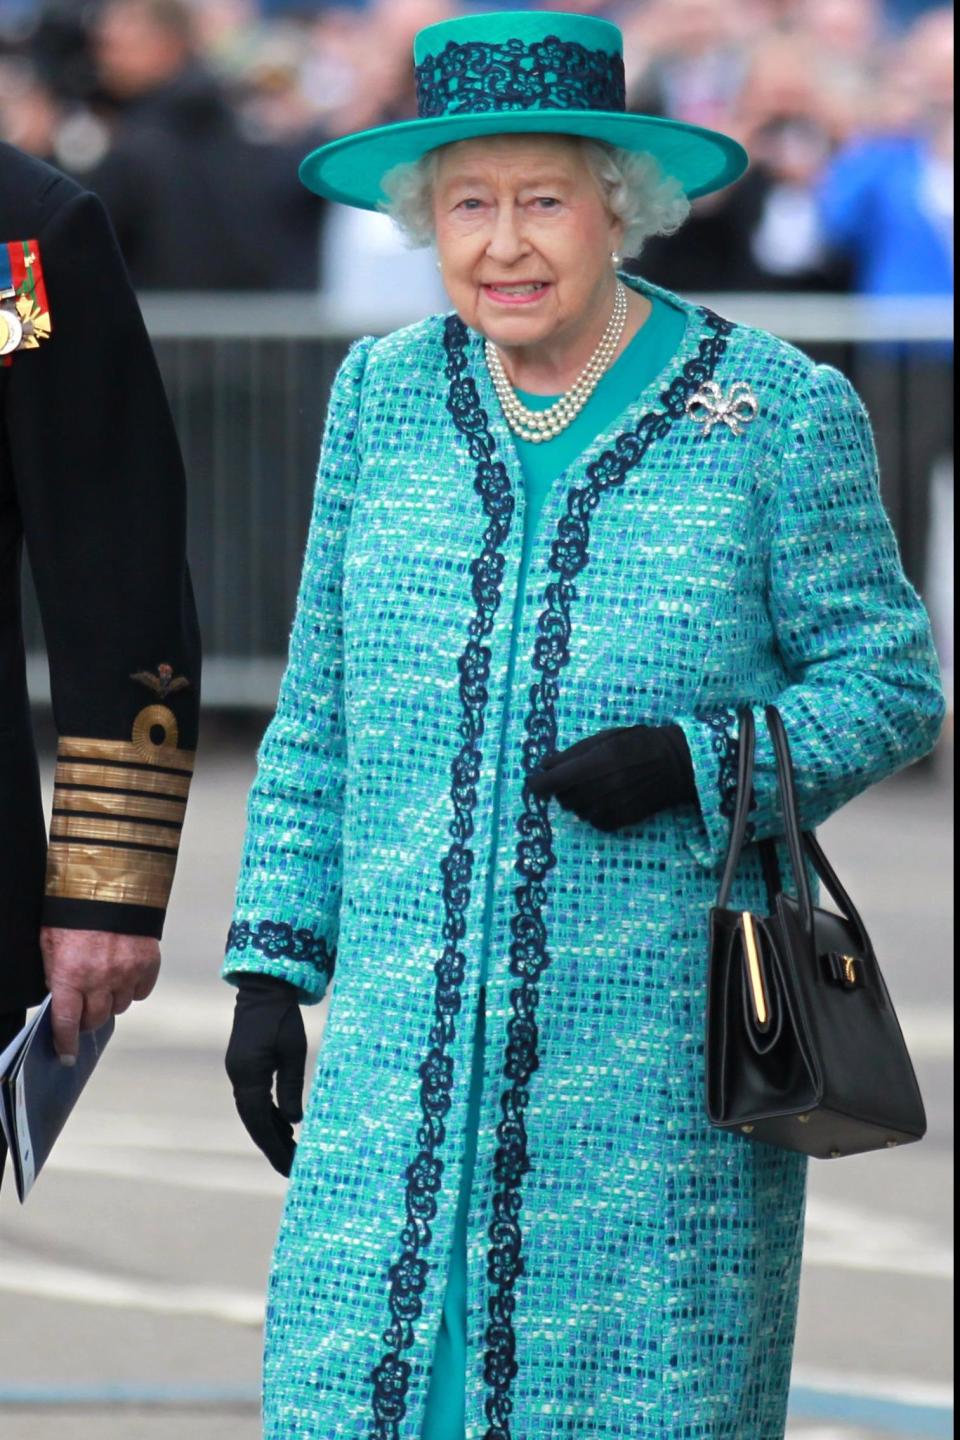 Her majesty rugged up in this colourful coat with a contrasting trim in 2014.